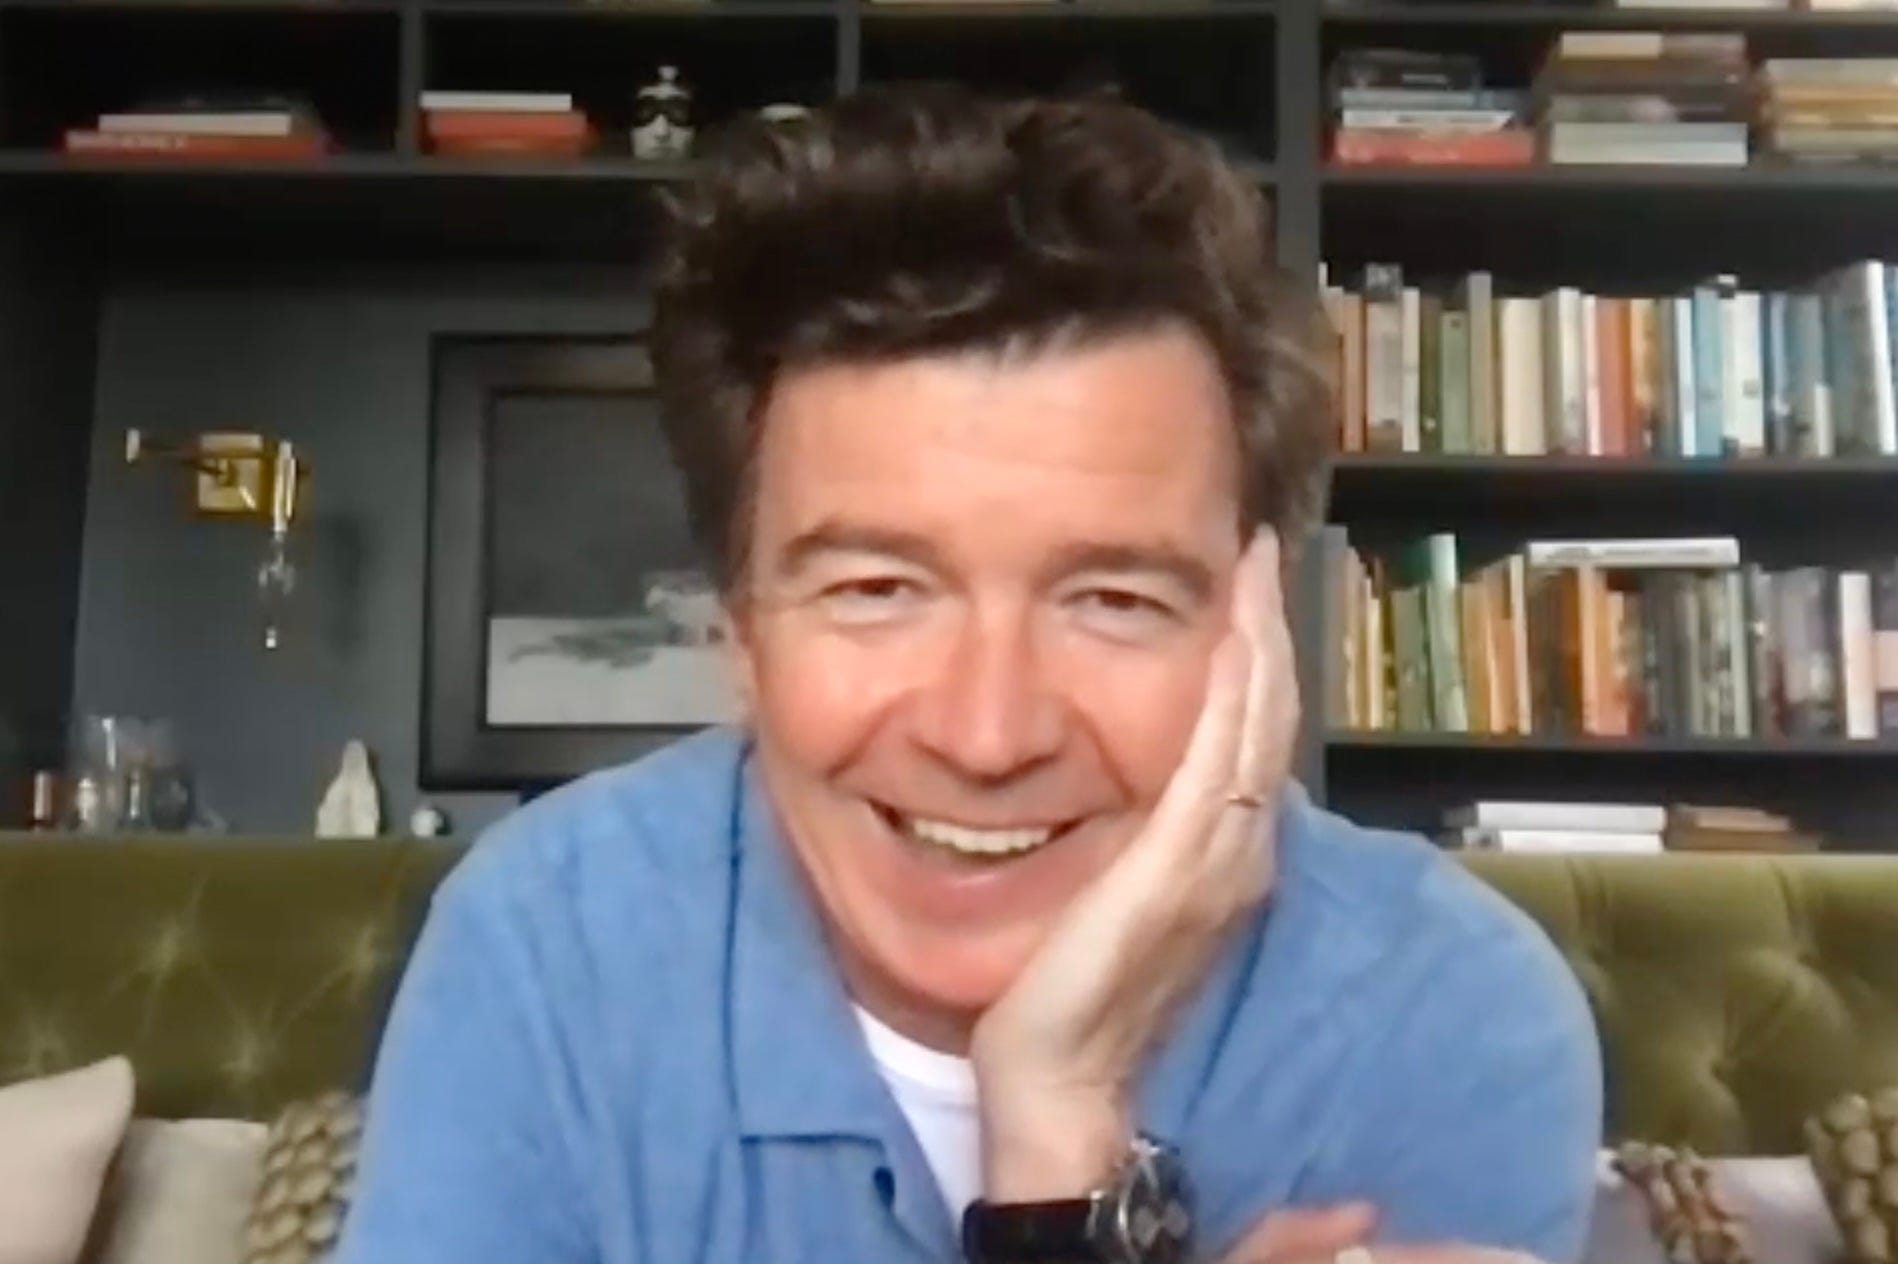 You're not being rickrolled: Rick Astley just hit number one in